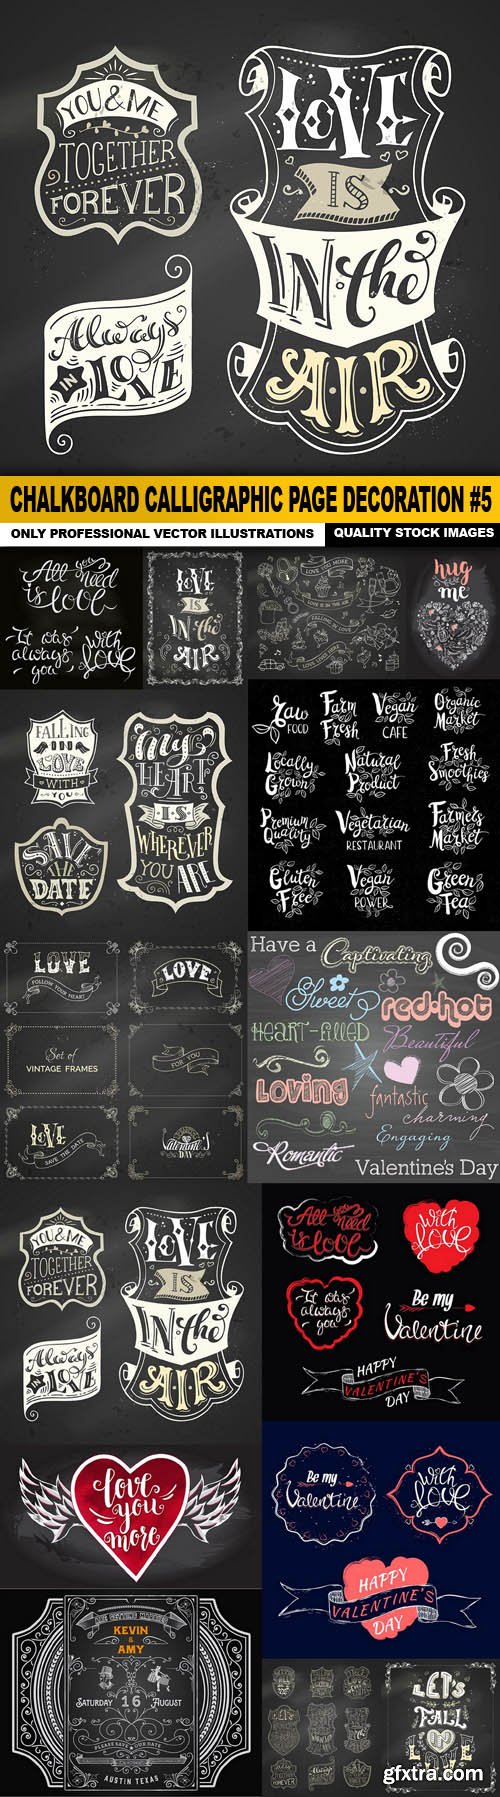 Chalkboard Calligraphic Page Decoration #5 - 15 Vector